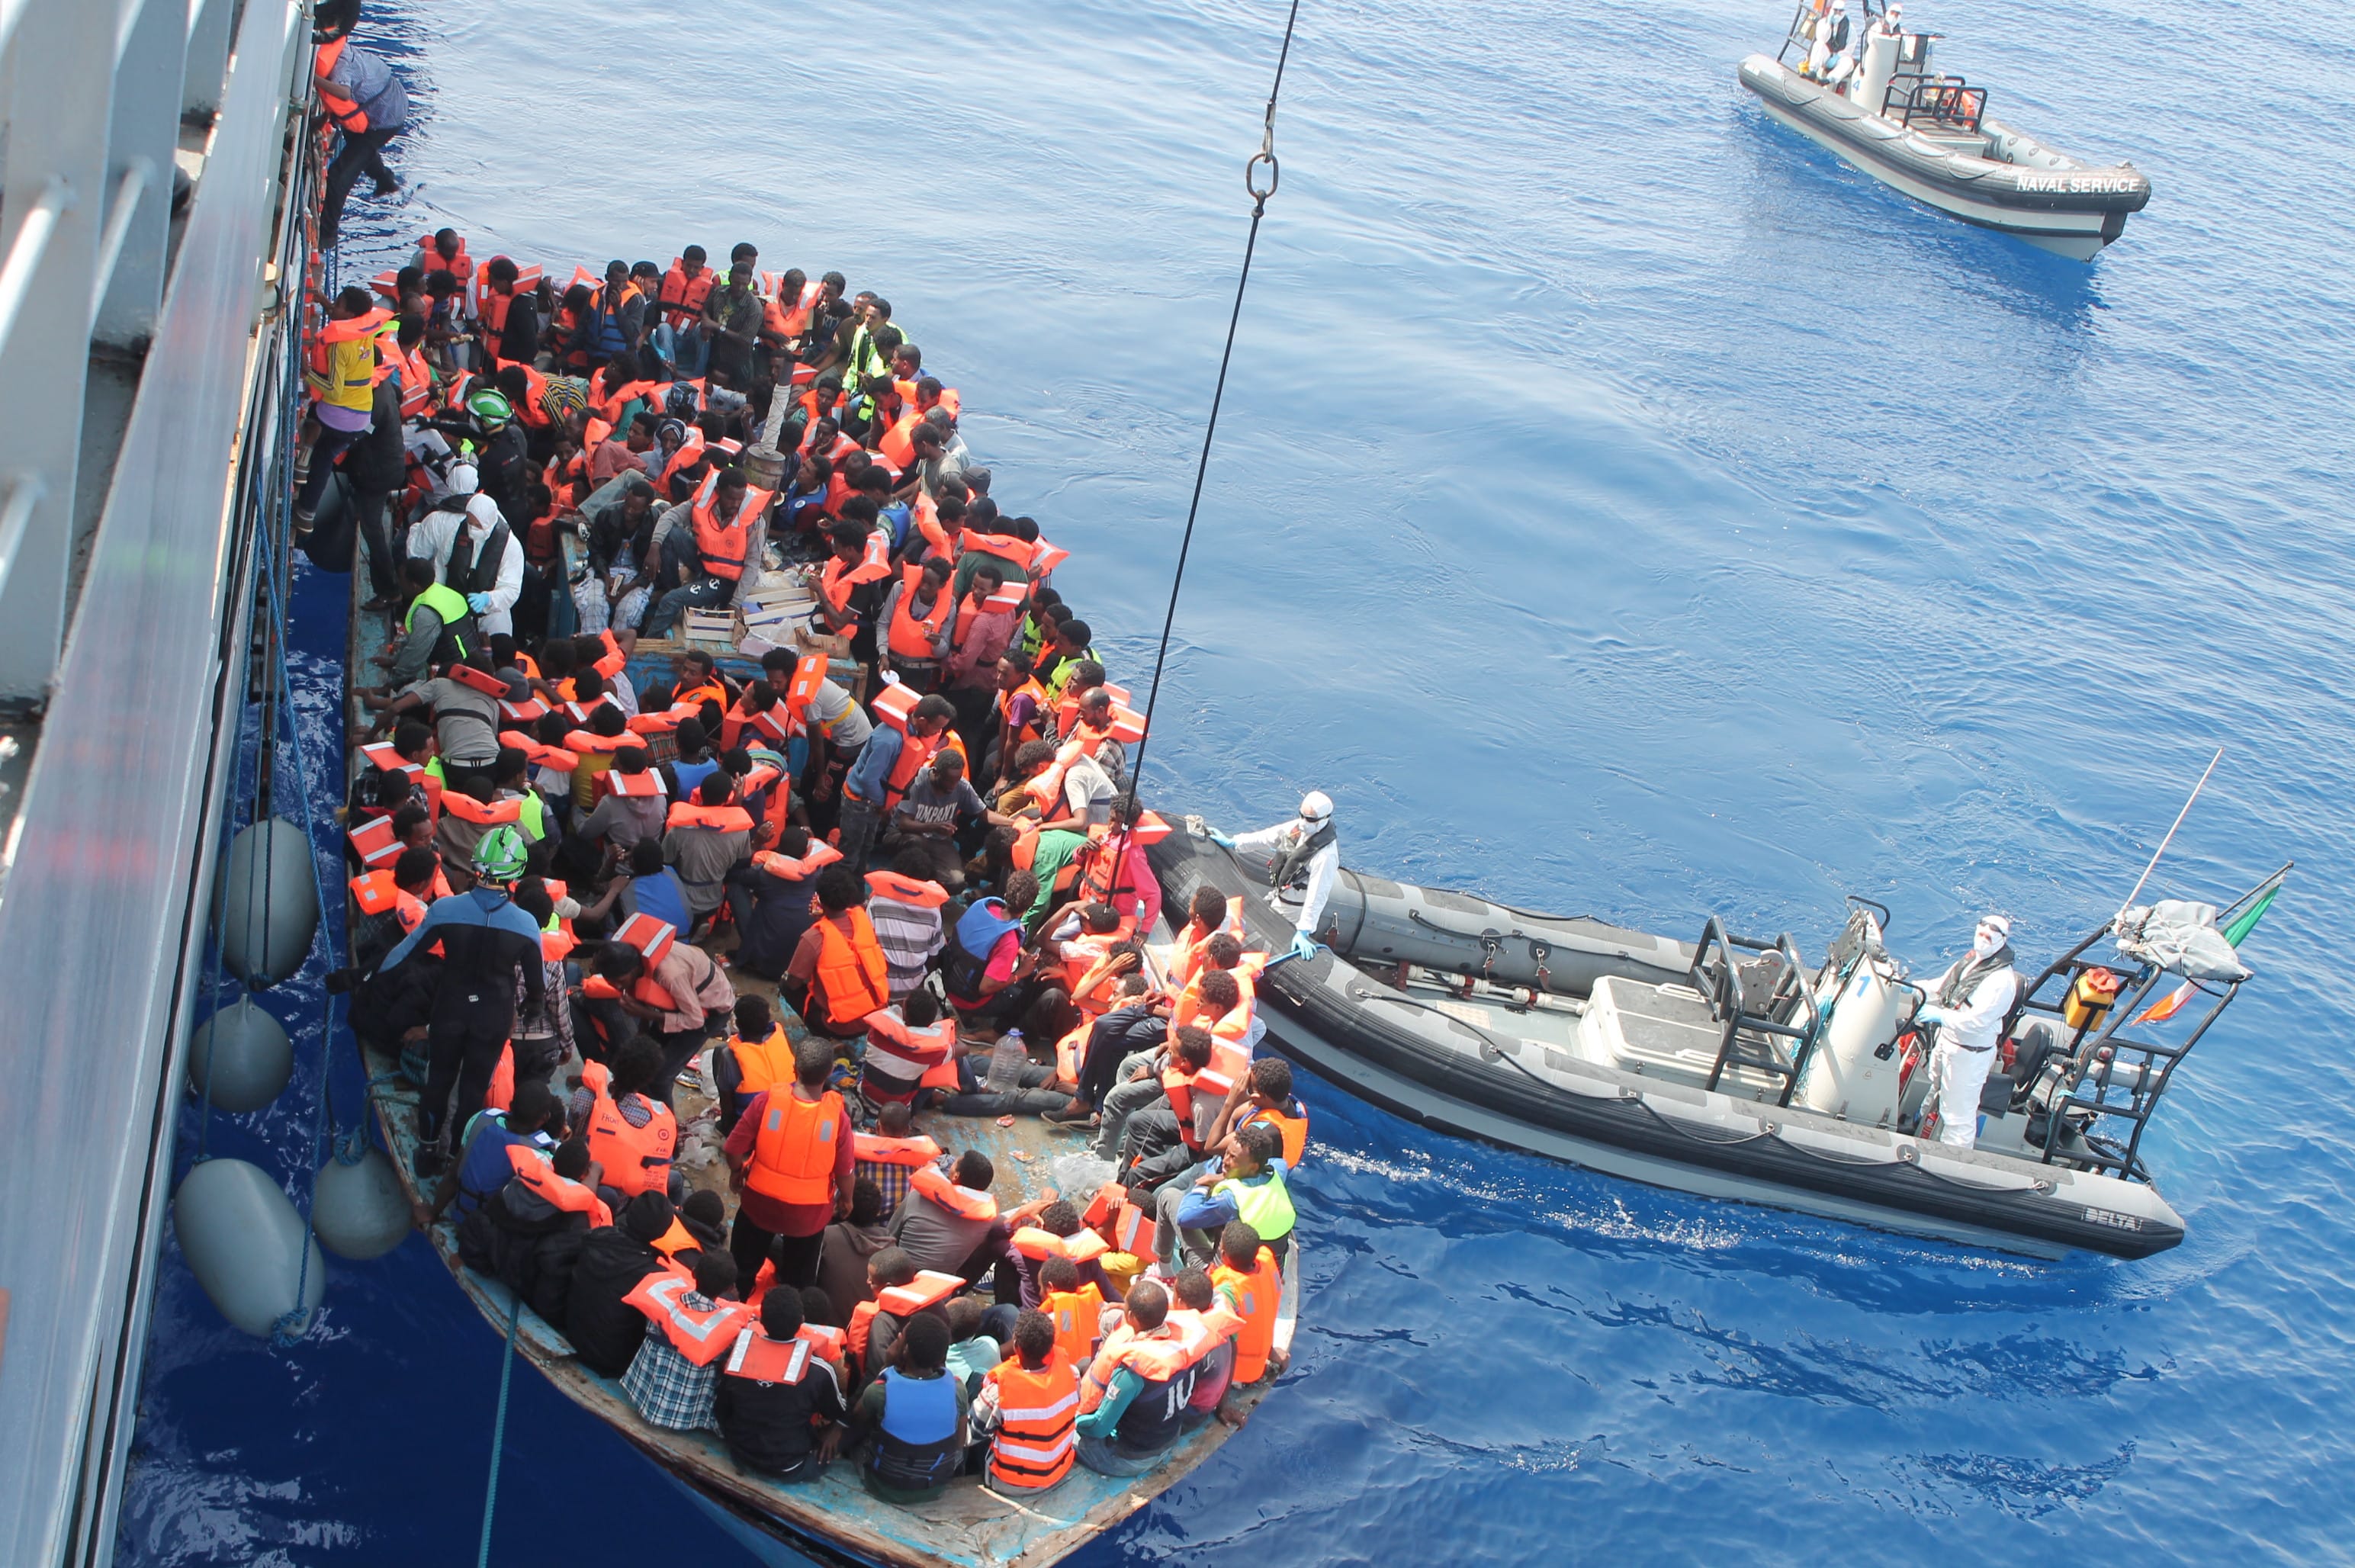 New MSF report condemns EU migration policies’ consequences for health